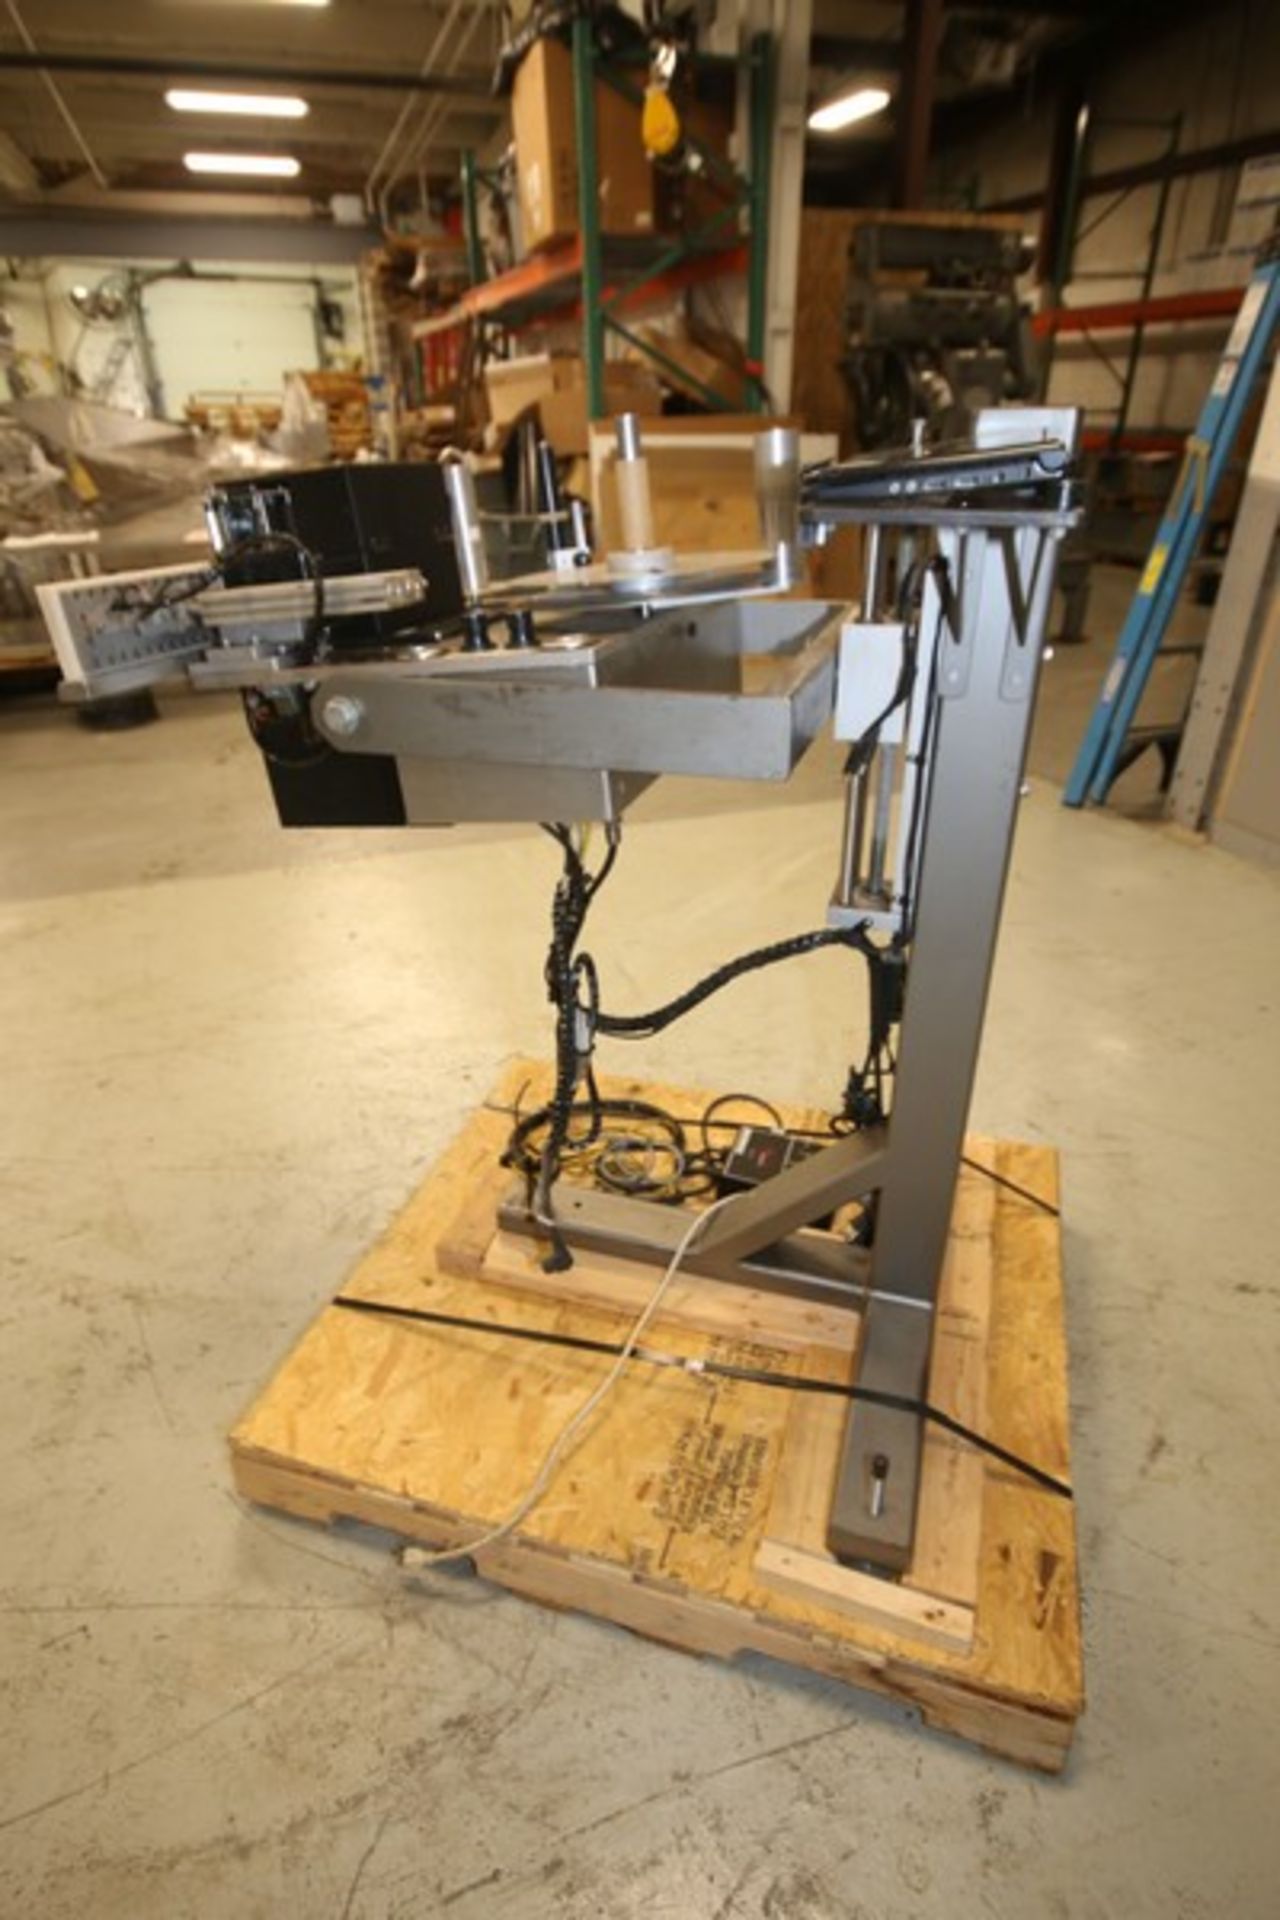 XPak Roll Fed Labeler, Model XP-A8200, SN SX052010, 115V, Mounted on Stand with Top Mounted Sato M- - Bild 5 aus 8